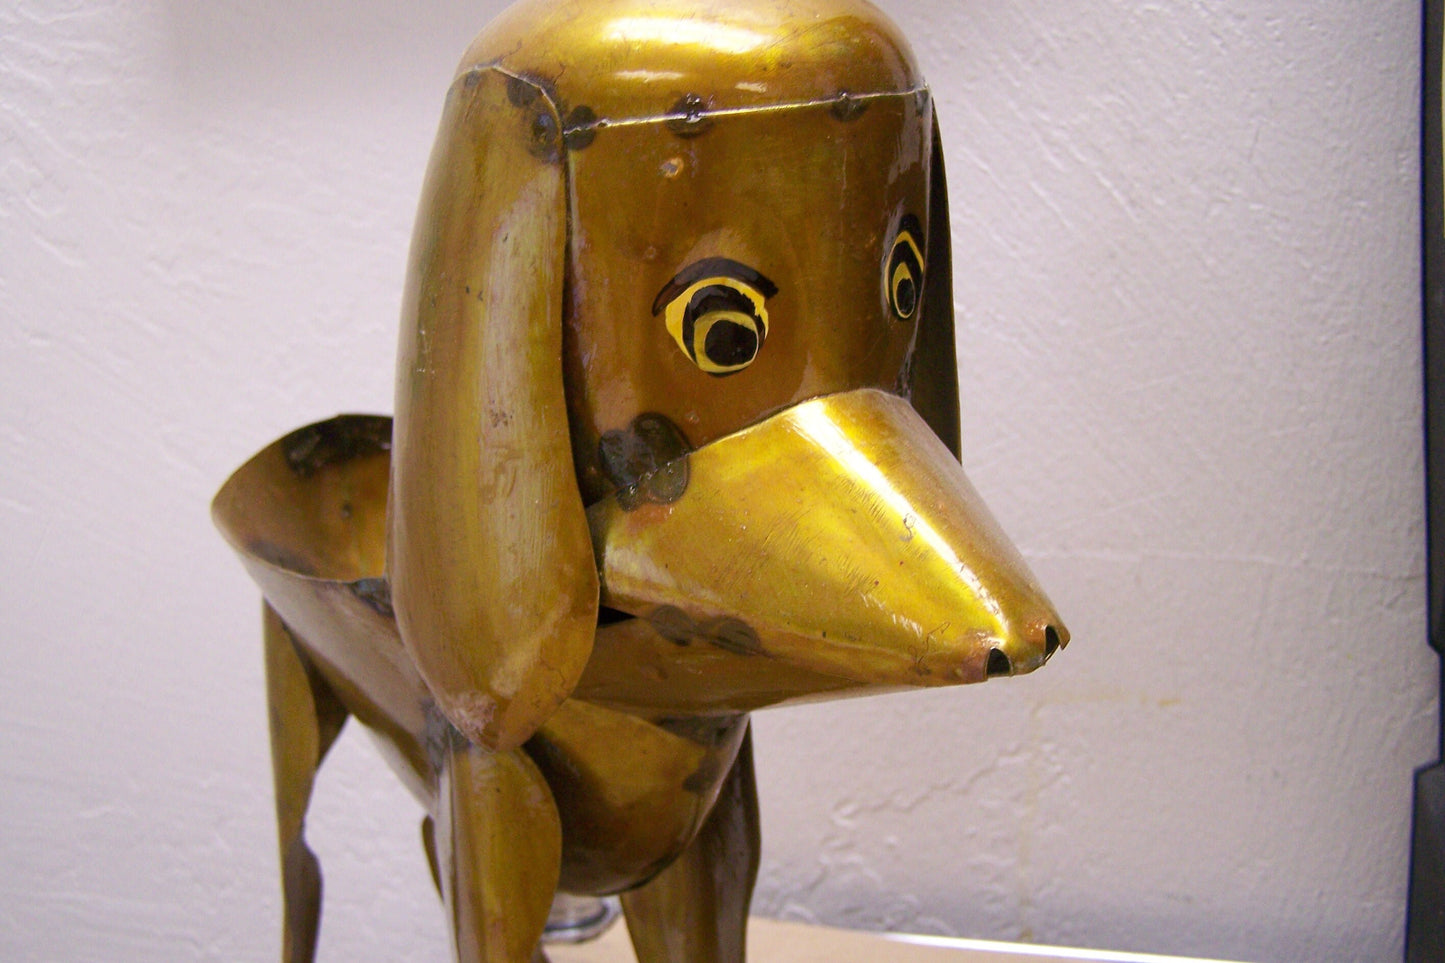 Metal Dog Planter - Made in Mexico